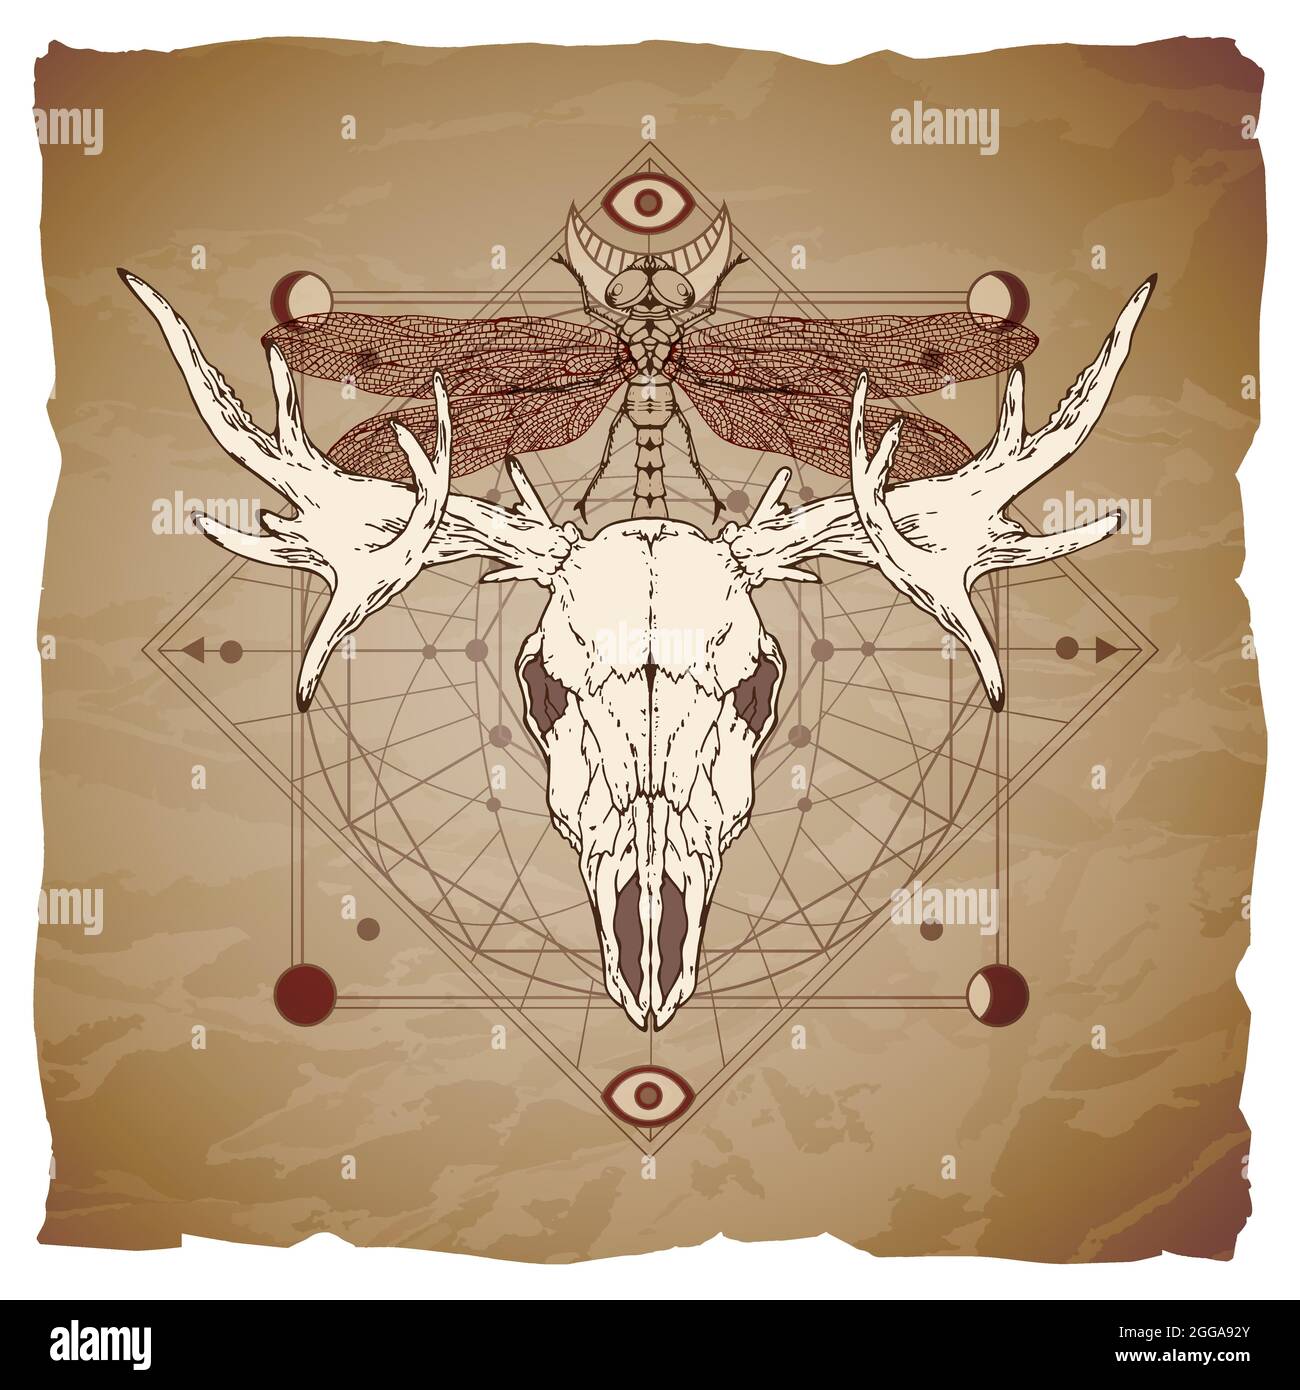 Vector illustration with hand drawn moose skull, dragonfly and Sacred geometric symbol on vintage paper background with torn edges. Stock Vector